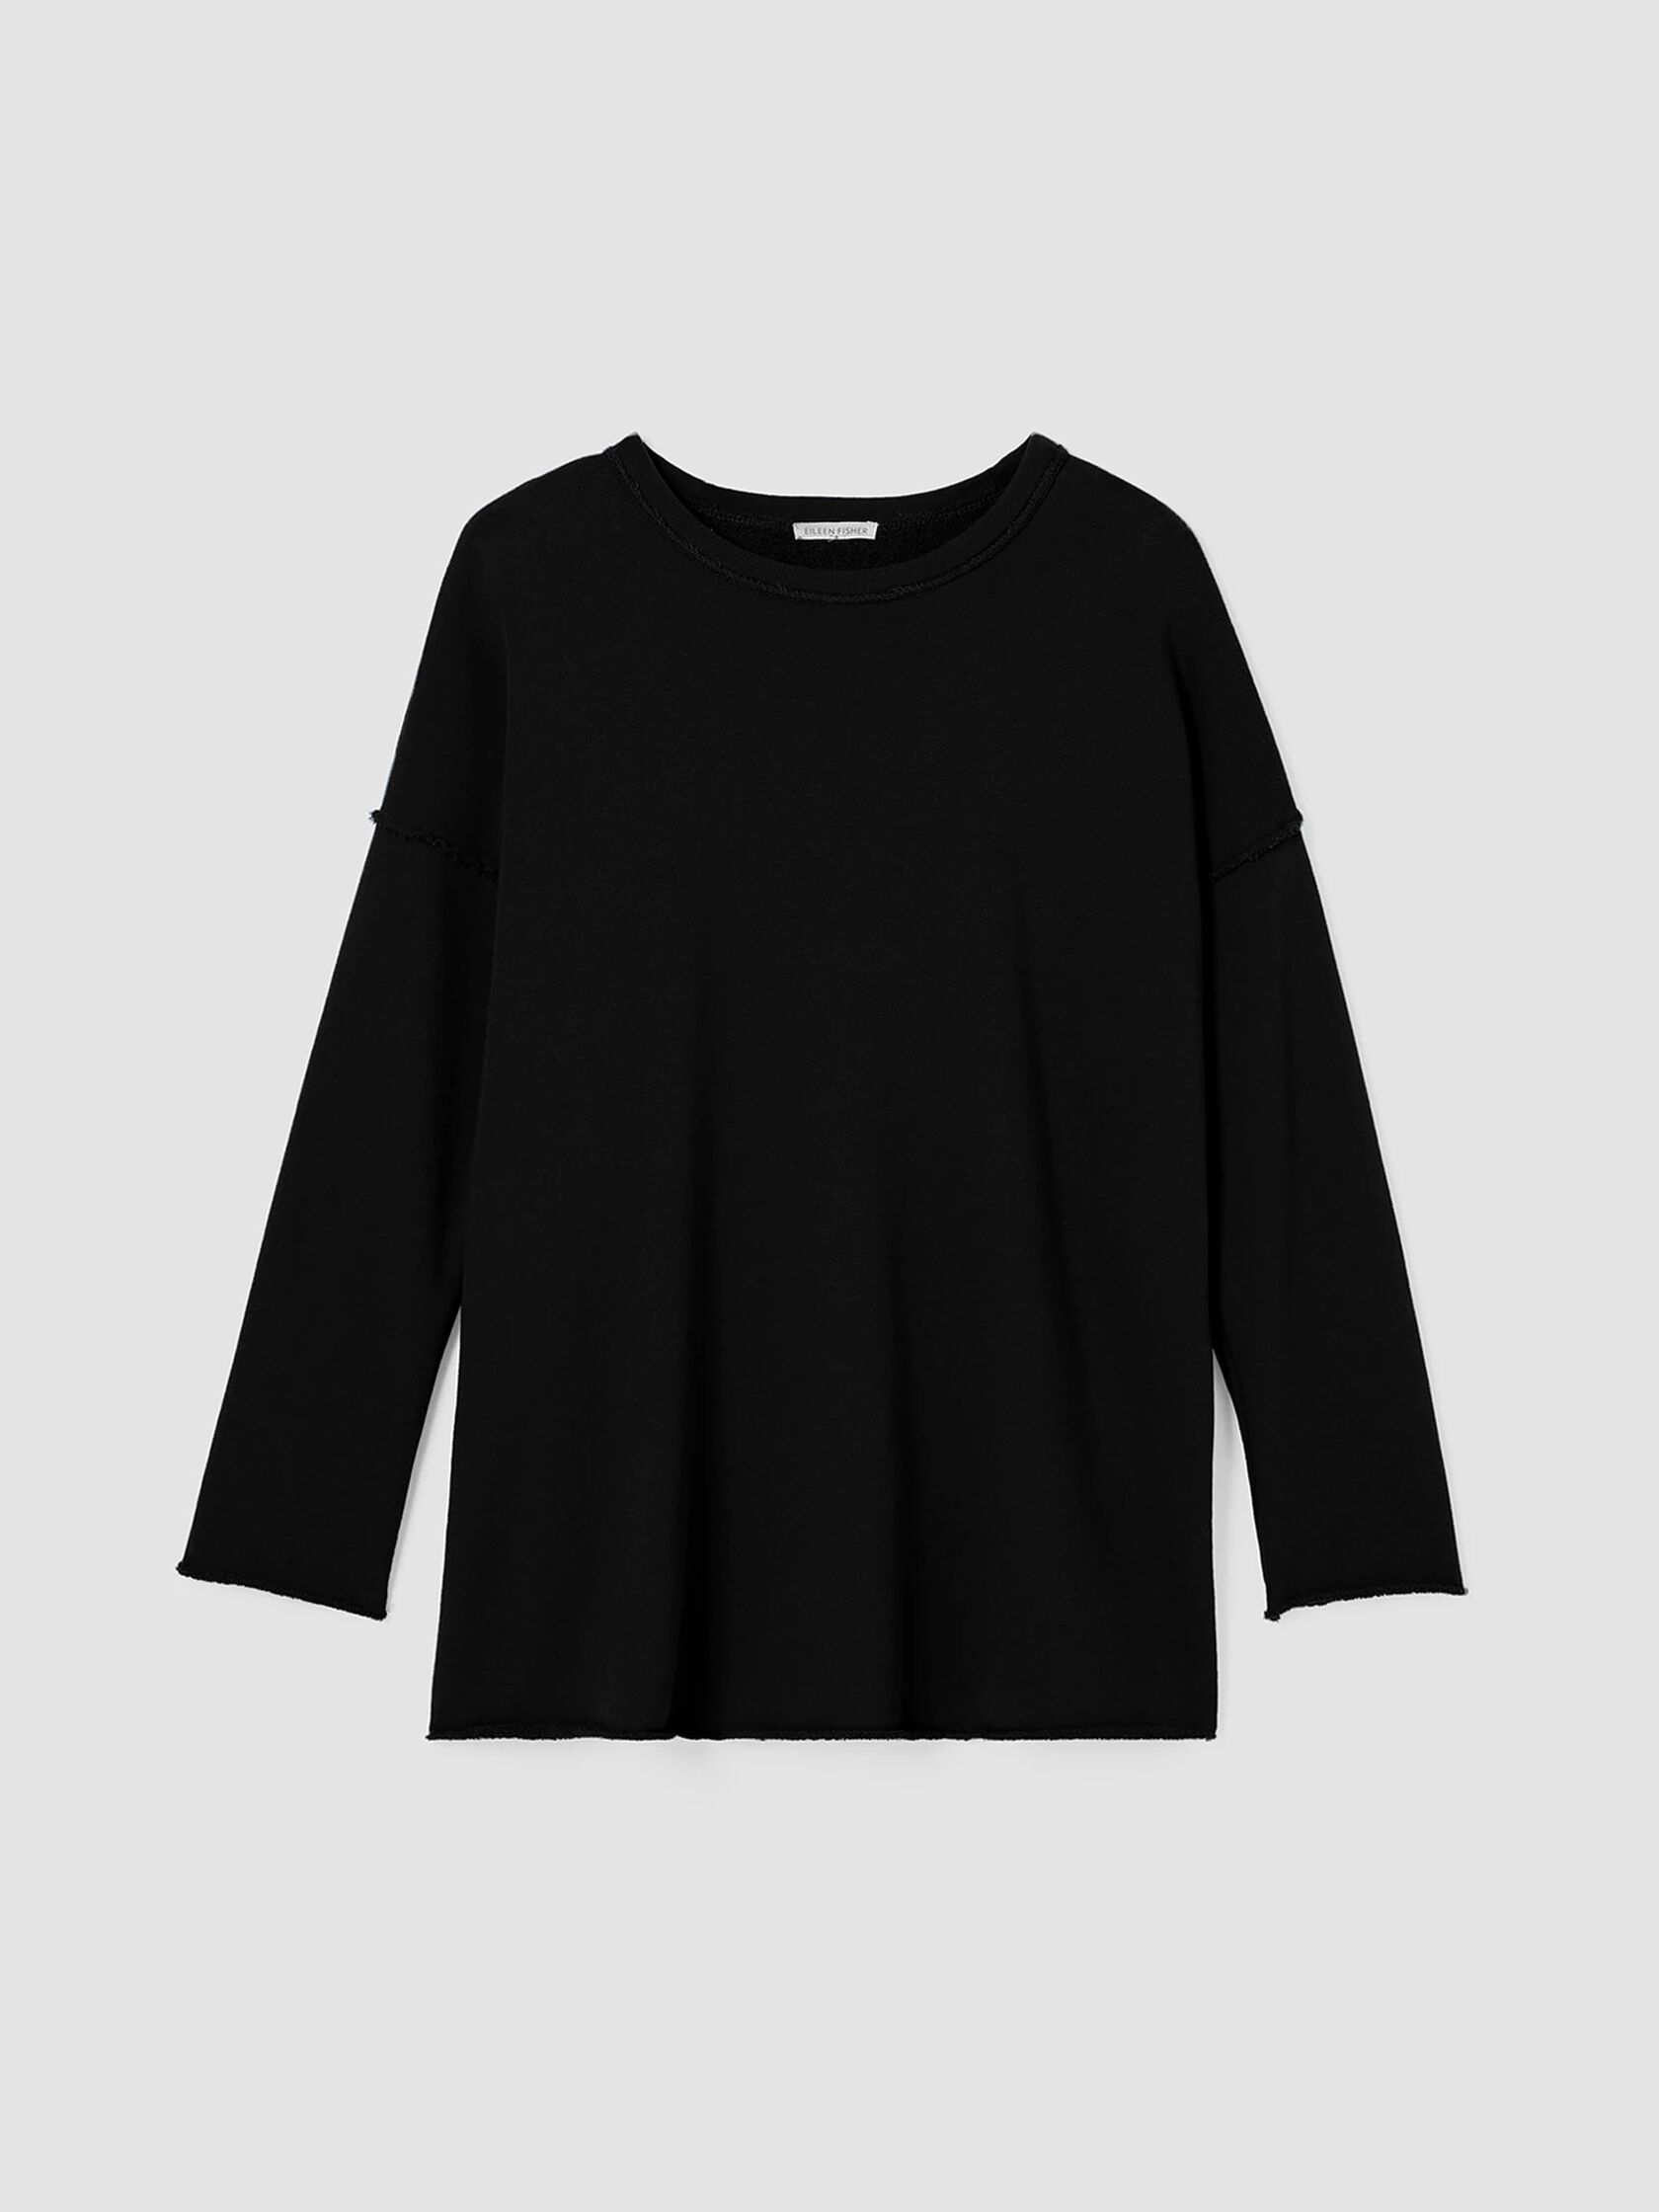 Organic Cotton French Terry Crew Neck Top